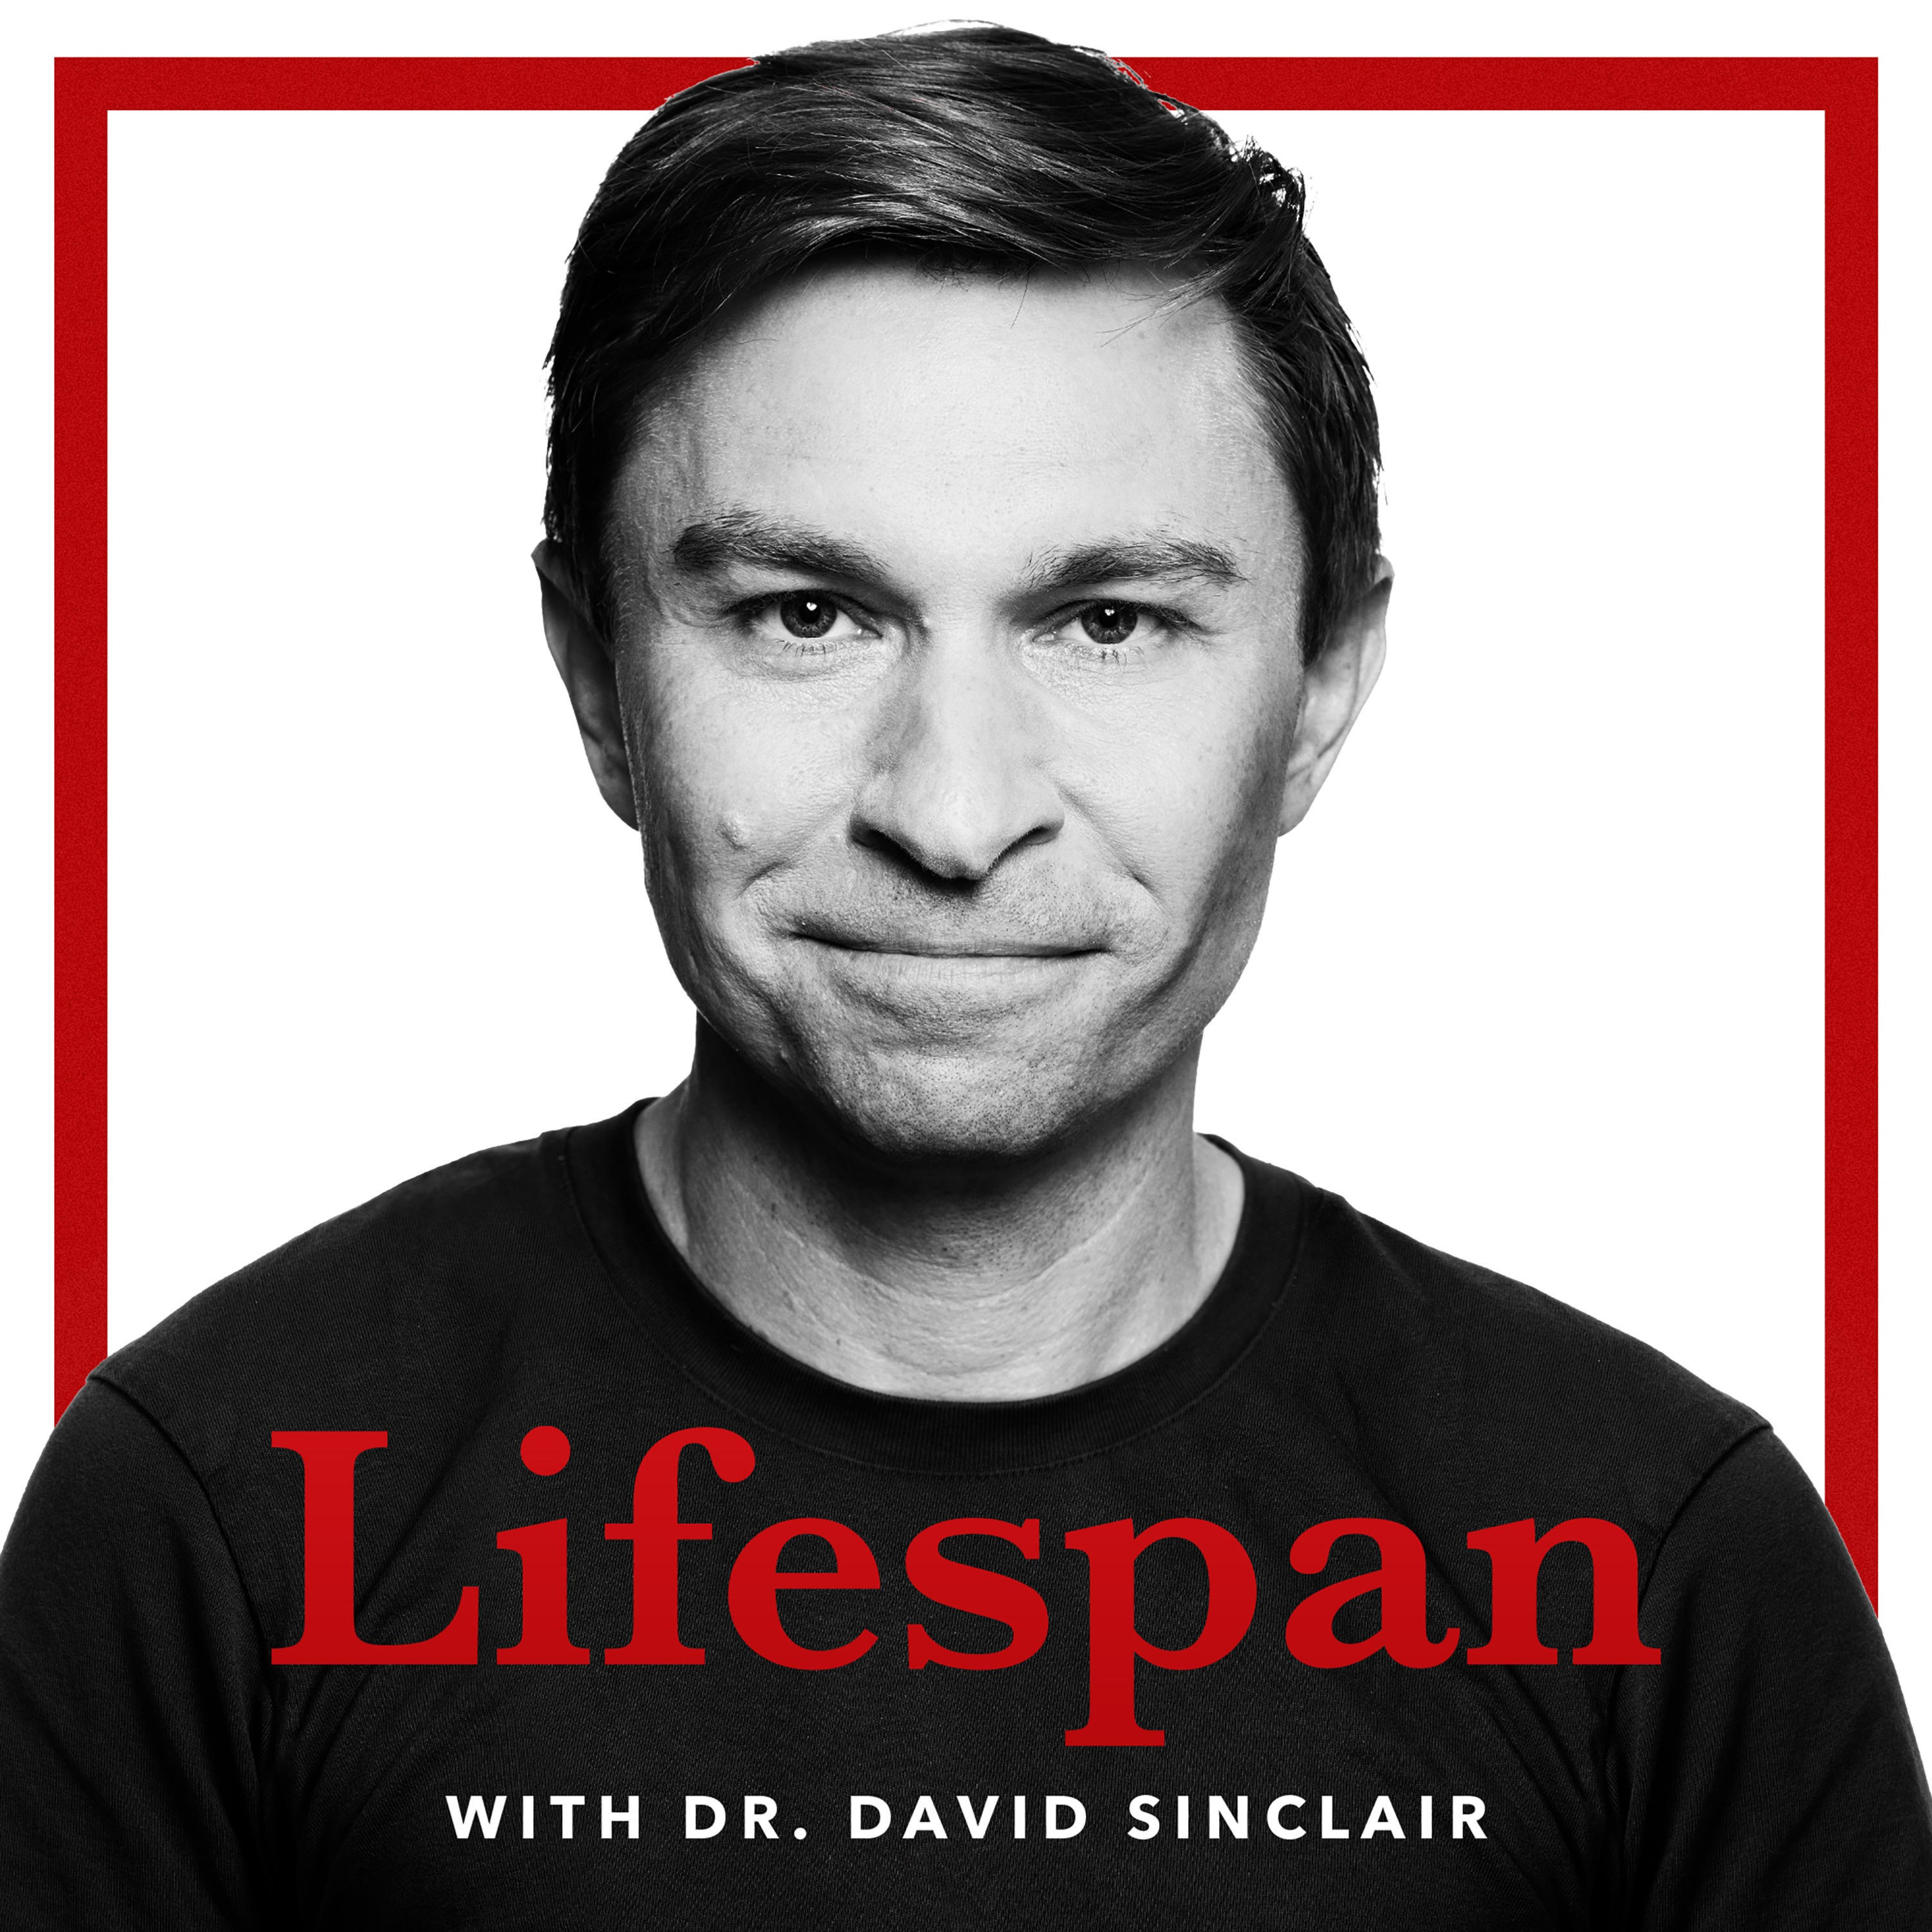 Biotracking, Age Reversal & Other Advanced Health Technologies | Lifespan with Dr. David Sinclair #8Episode 8